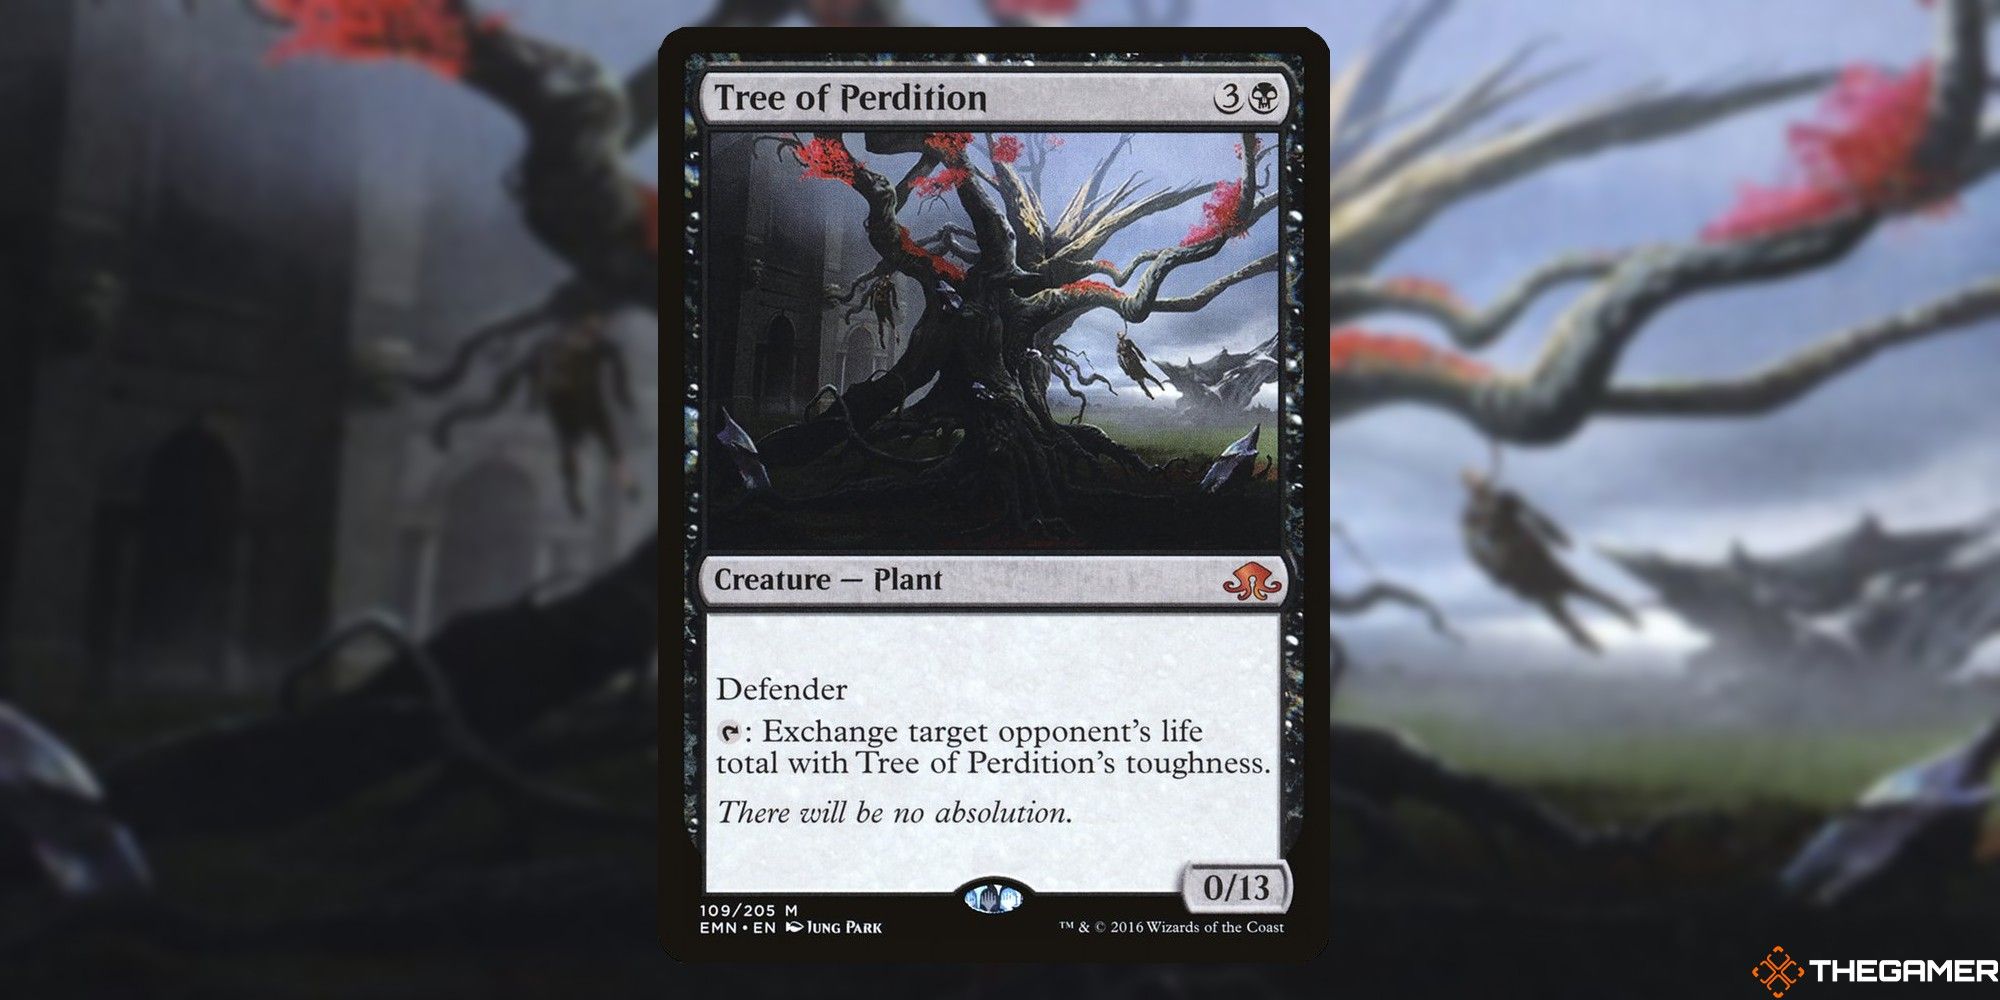 Tree of Perdition card and art background